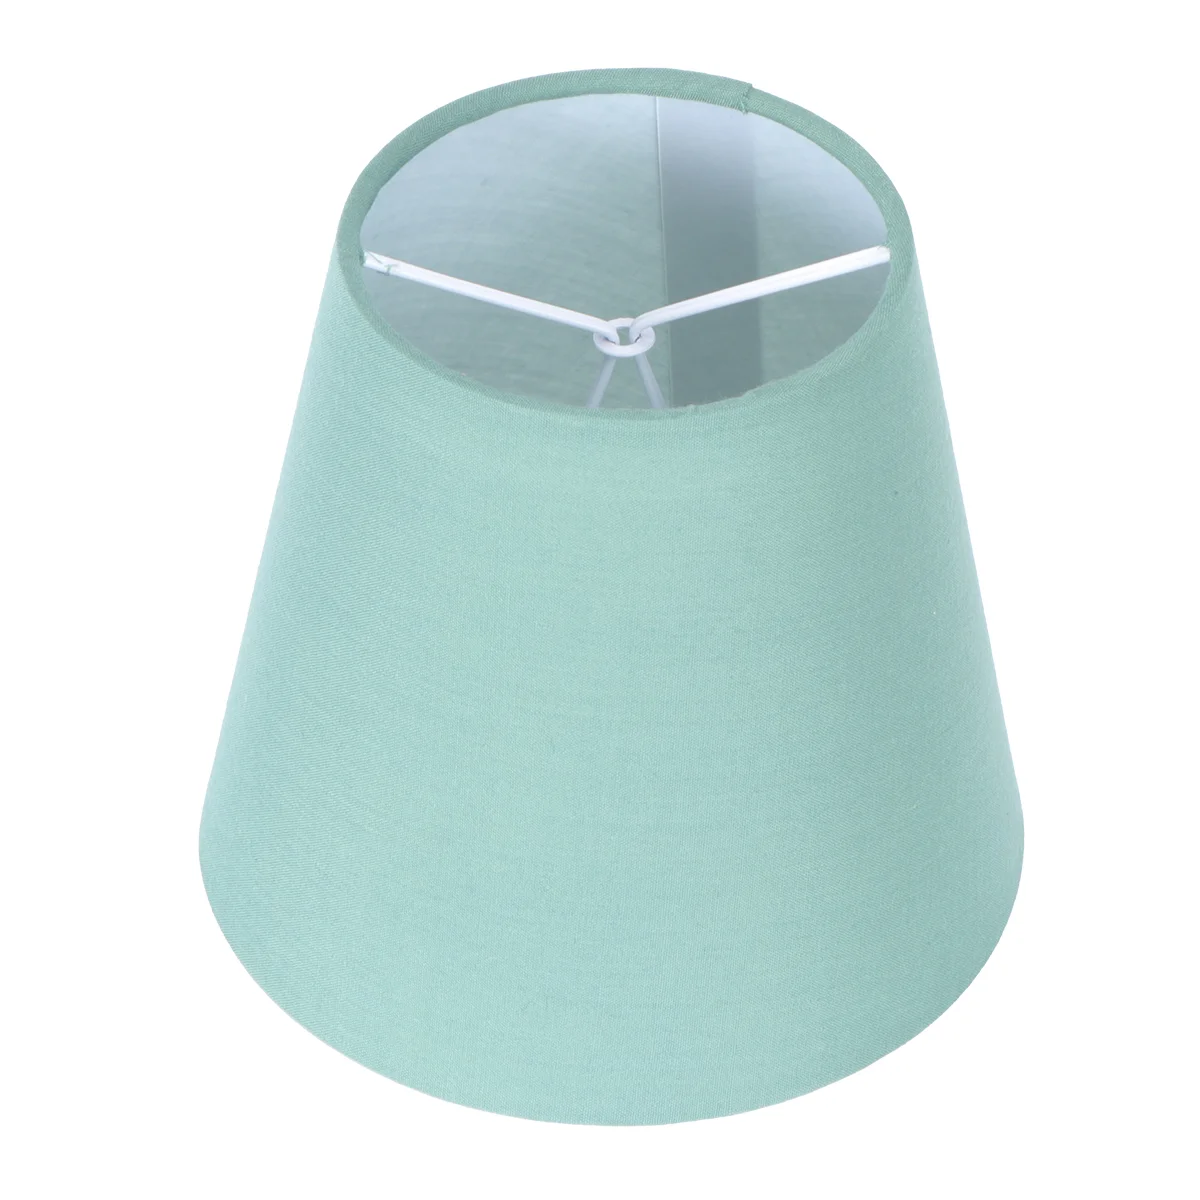 

Shade Lamp Light Cover Lampshade Shades Cloth Clip Table Drum Decor Bulb Ceiling Chandelier Beside Bedroom Pendant Lighting